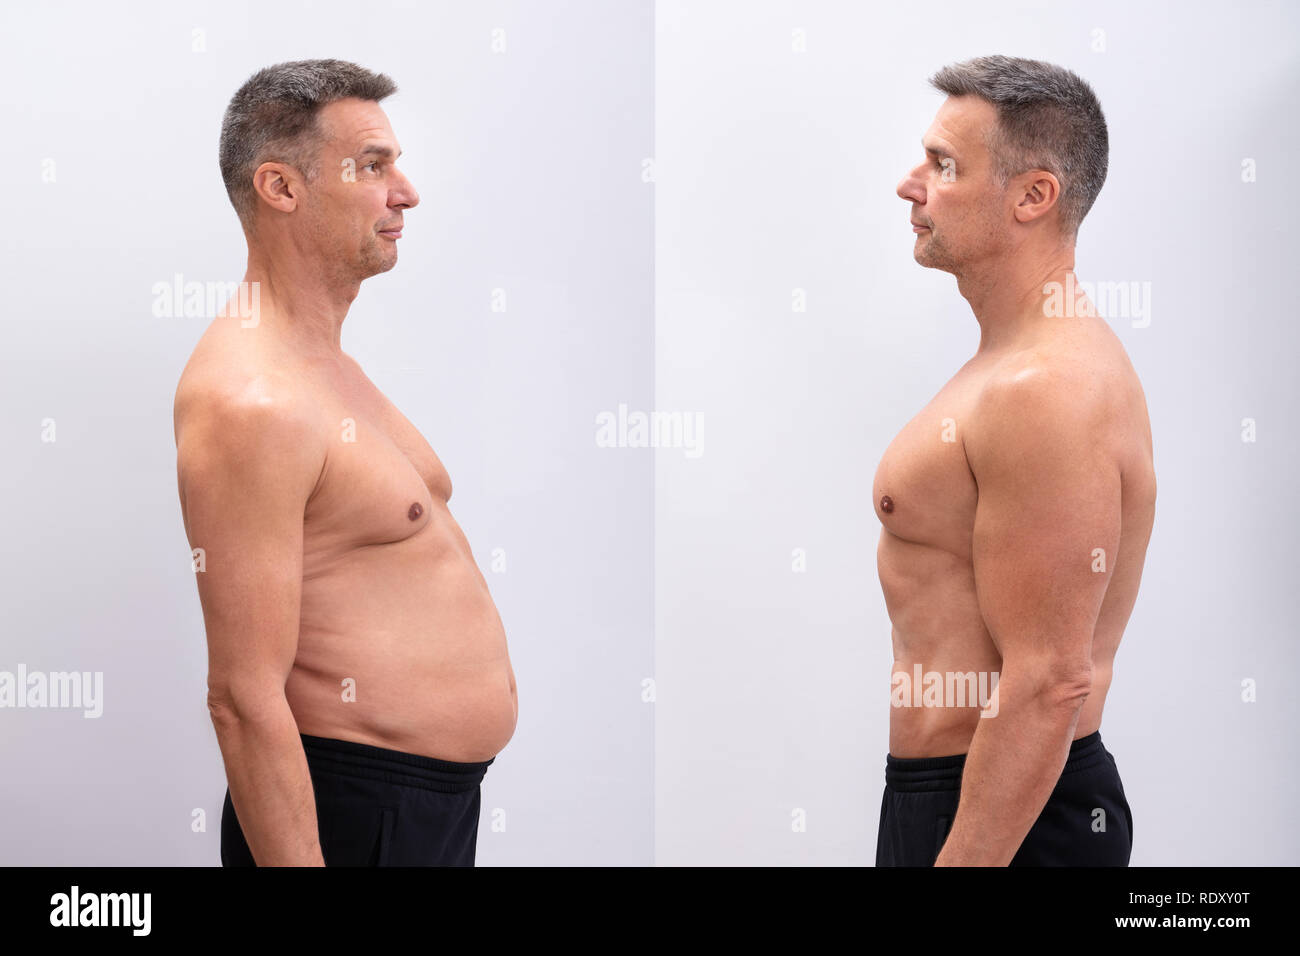 Side View Of A Mature Man Before And After Loosing Fat On White Background. Body shape was altered during retouching Stock Photo